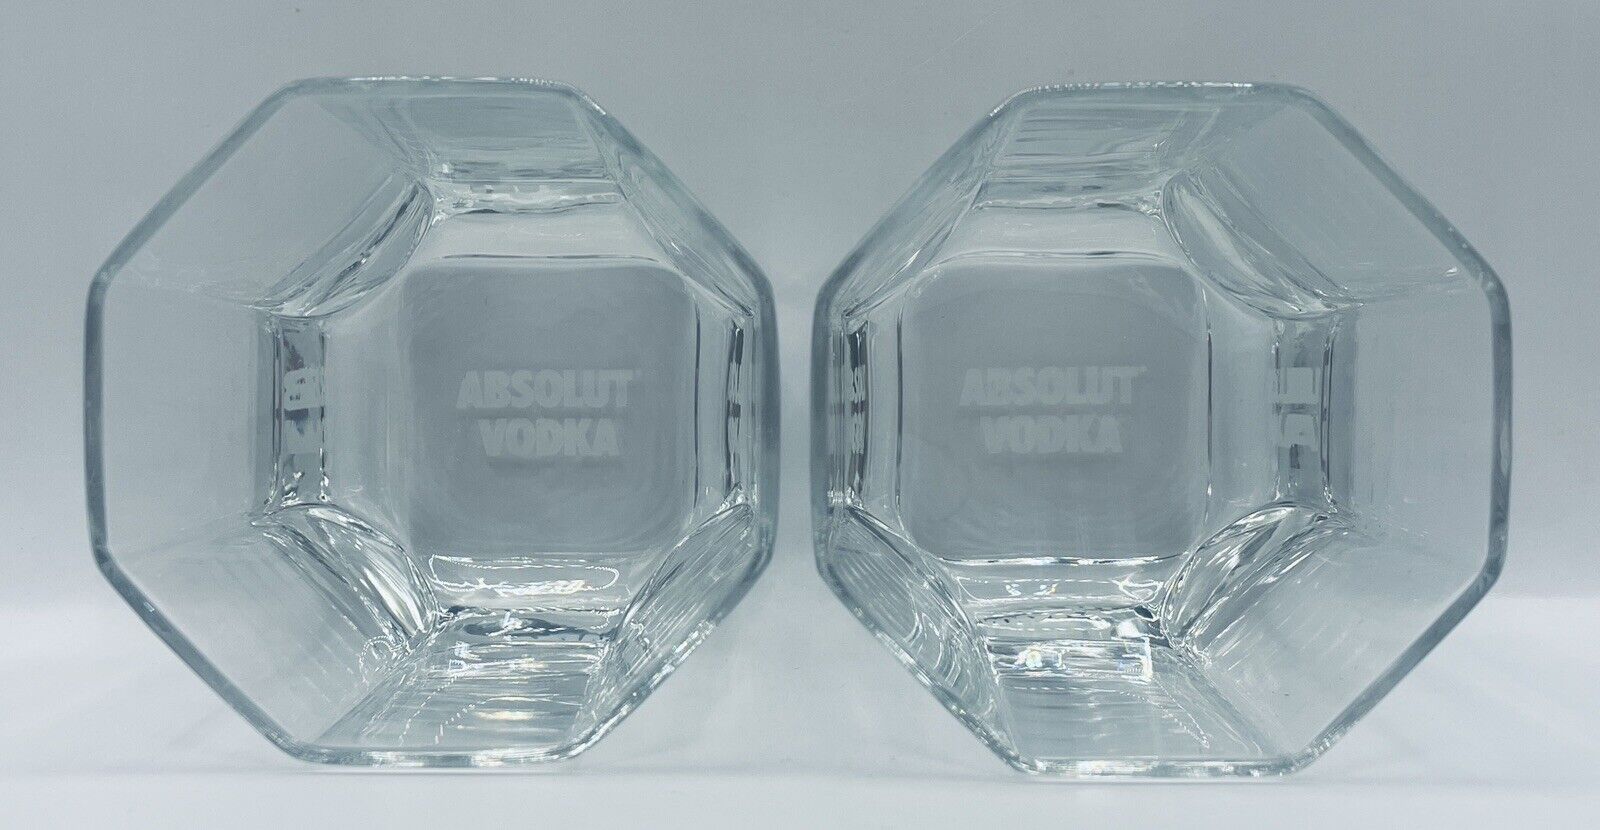 Pair Of Absolut Vodka Octagon Rocks Glasses Eight Sided Etched